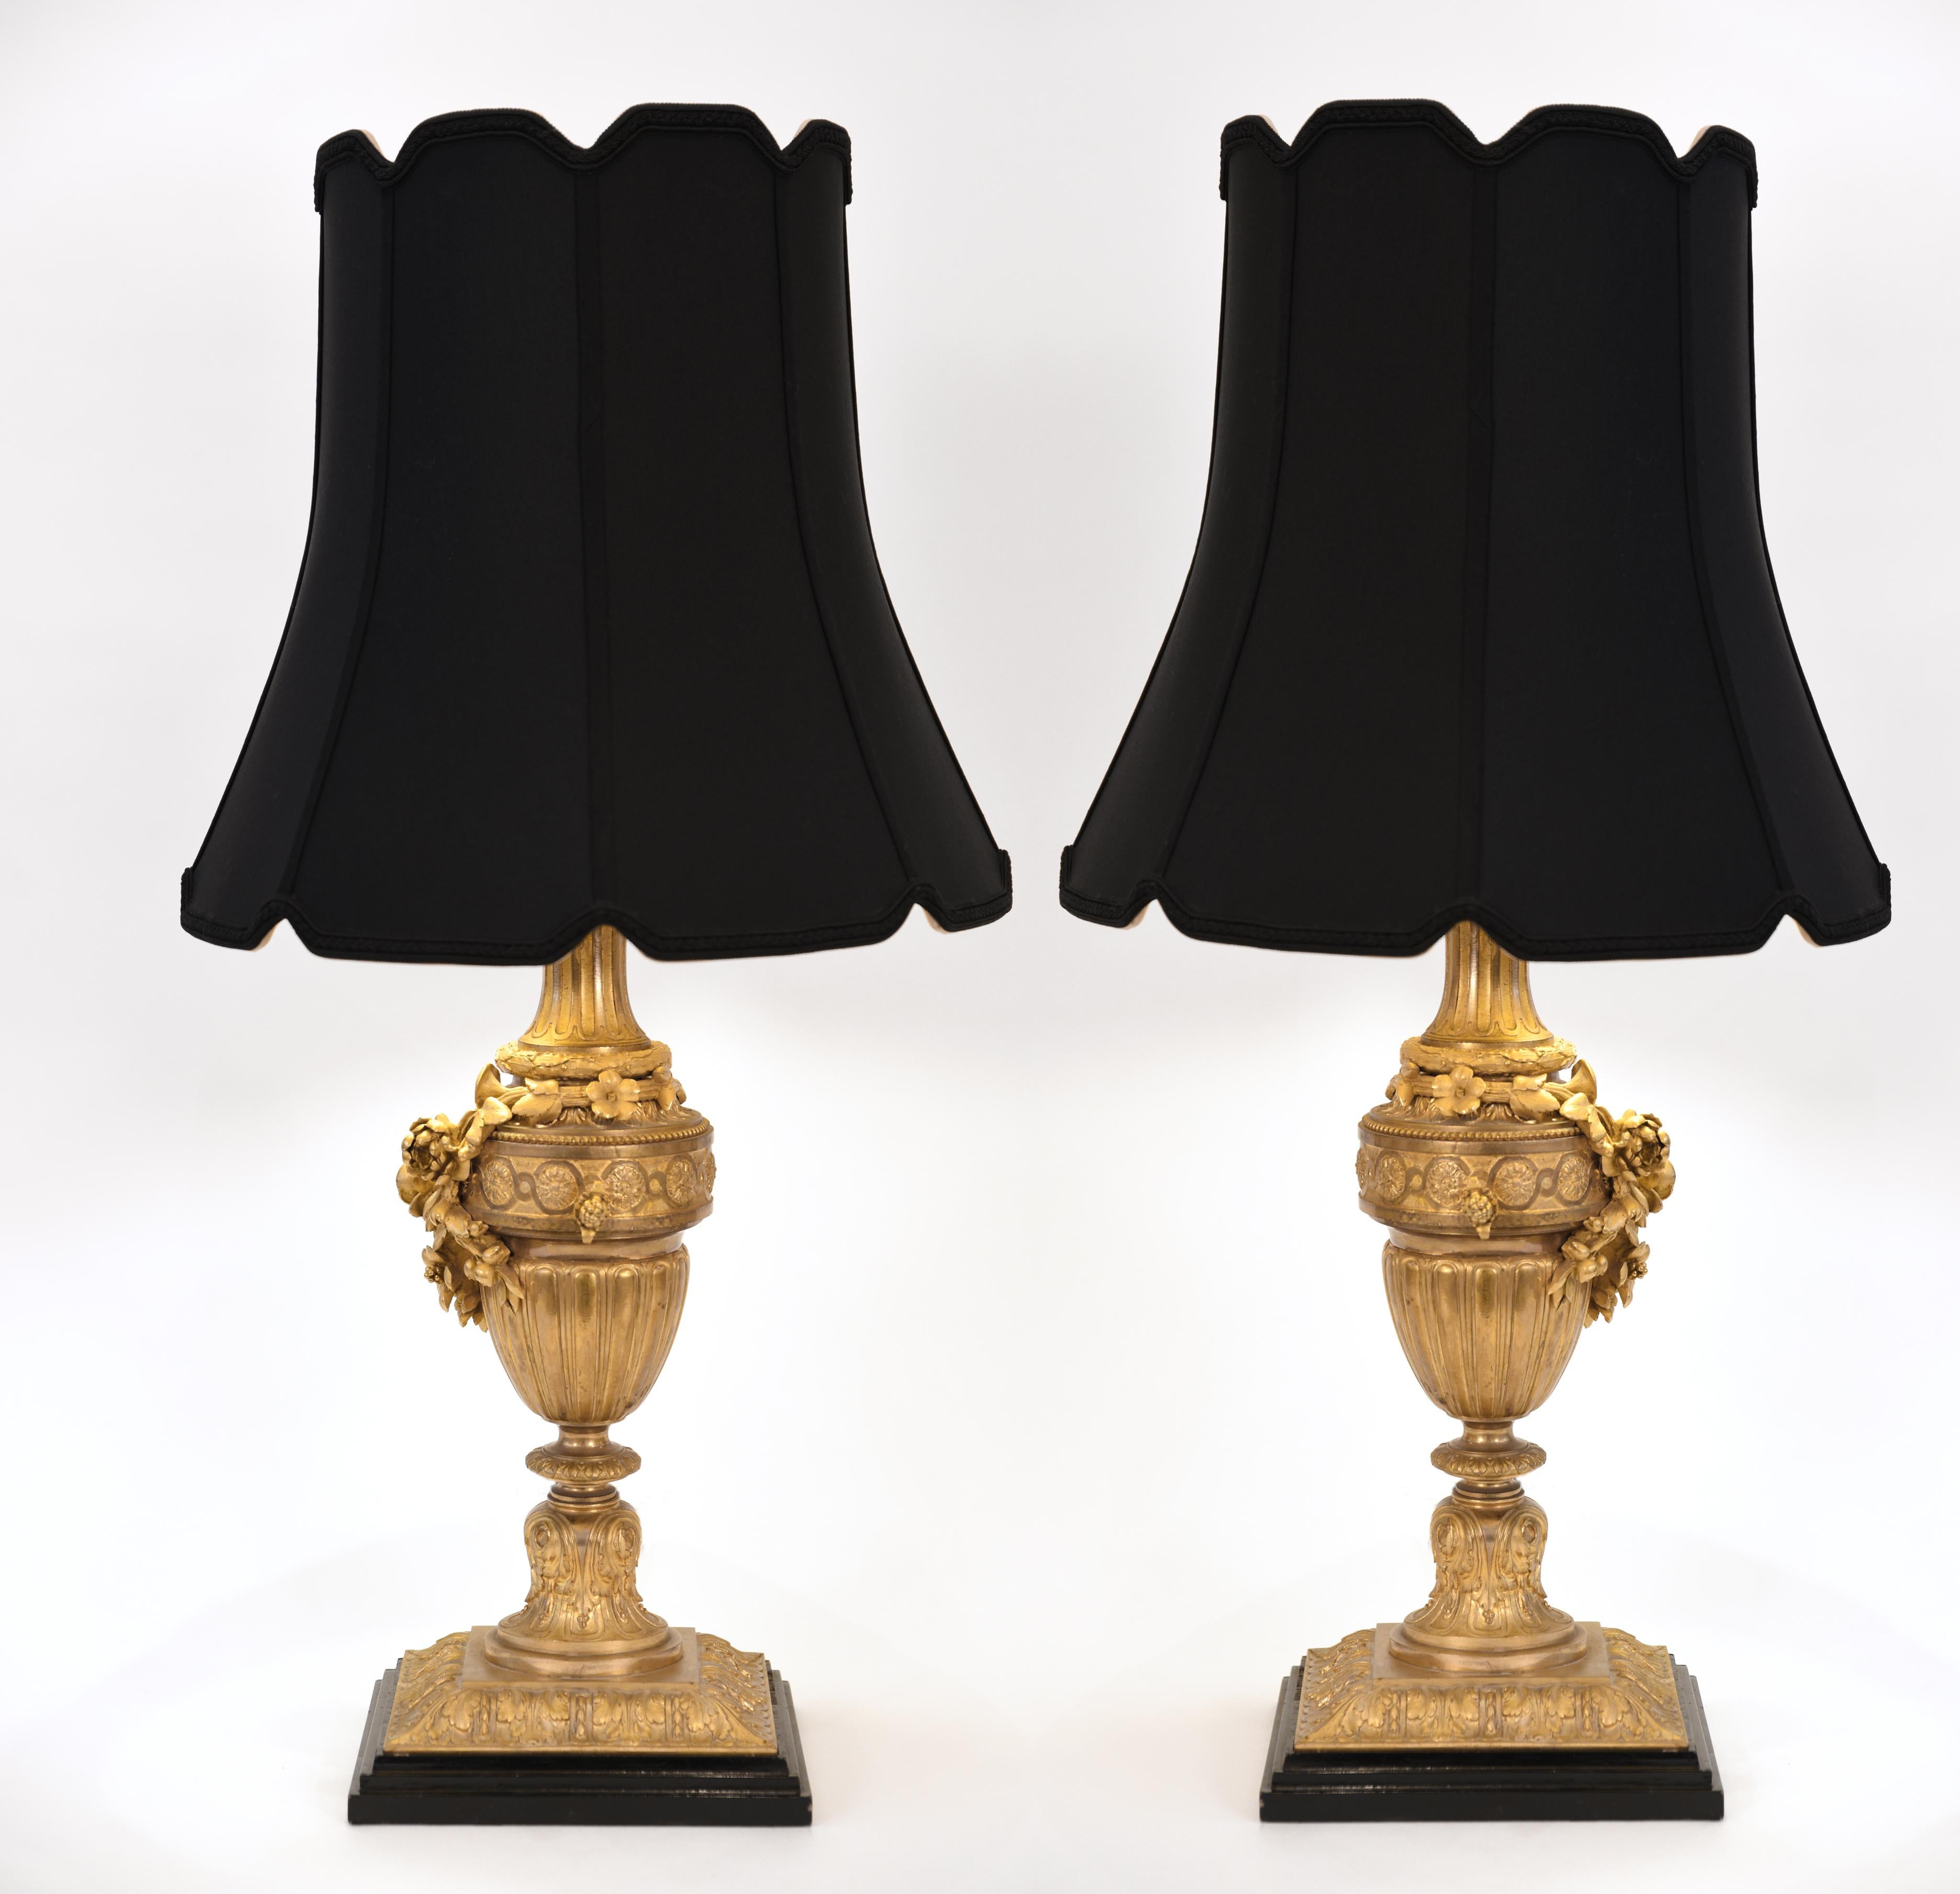 A pair of Louis XVI style gilt bronze task / table lamps. Each lamp is in excellent antique working condition, rewired for US use. Each lamp comes with a white round drum with silk exterior shade measuring 13 inches x 14 inches x 13.5 inches. Each